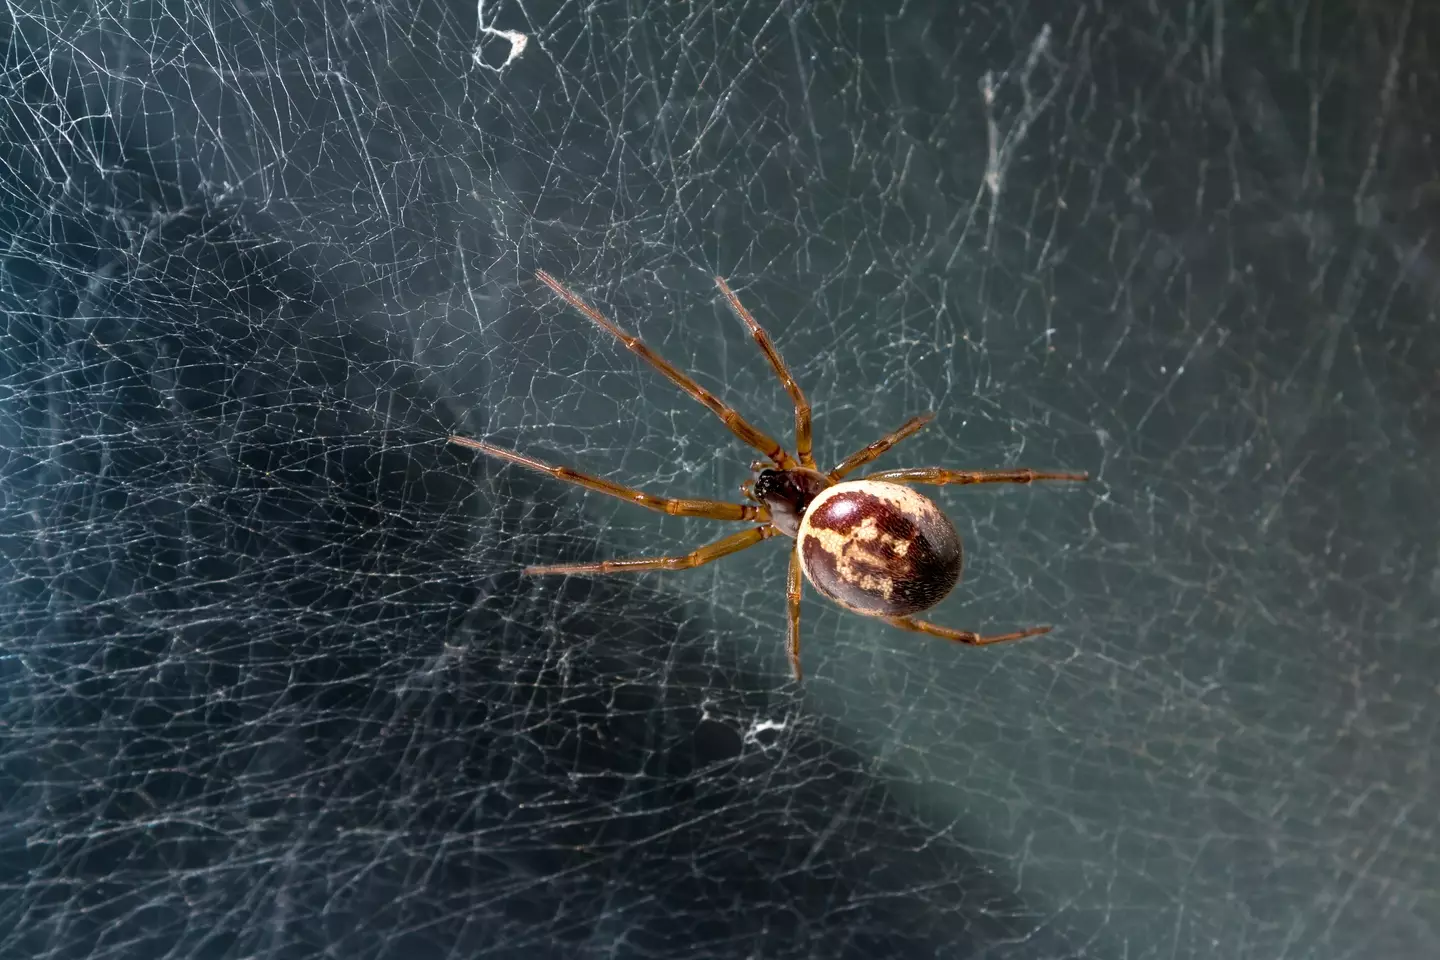 False widows usually only bite when they feel threatened.